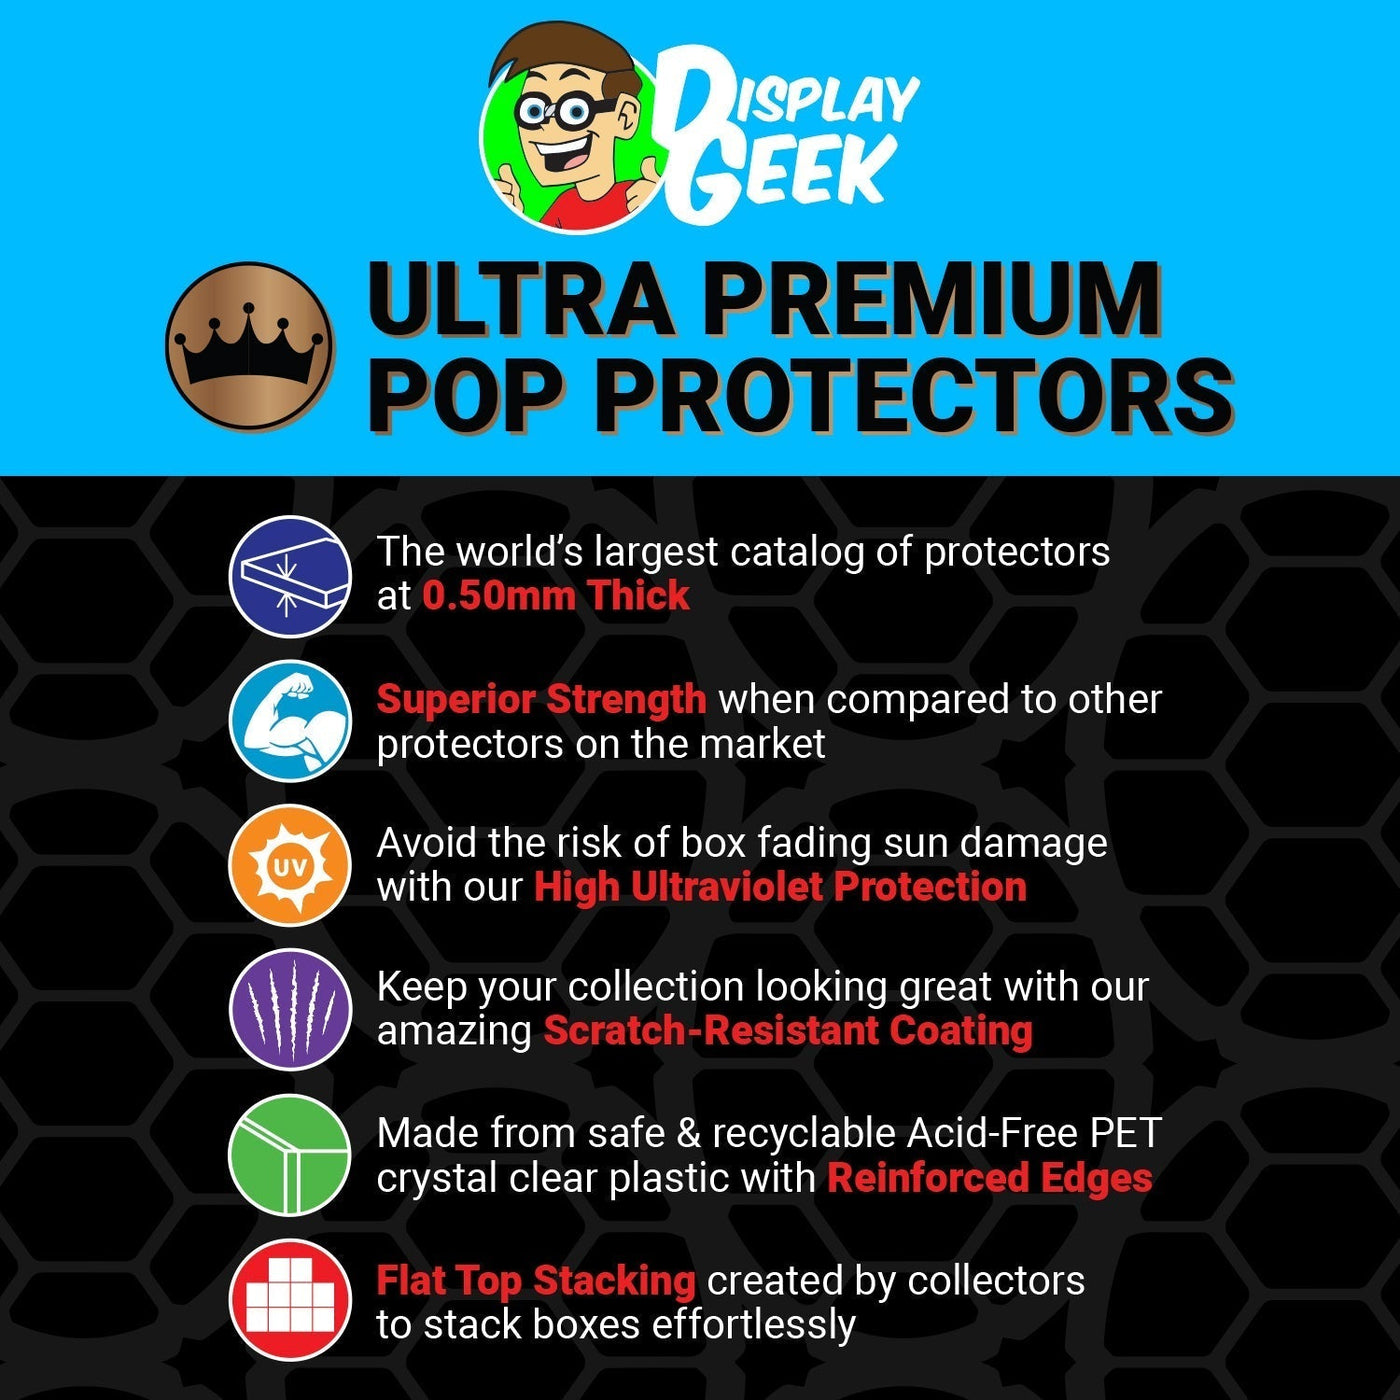 Pop Protector for 2 Pack The Grady Twins Funko Pop on The Protector Guide App by Display Geek